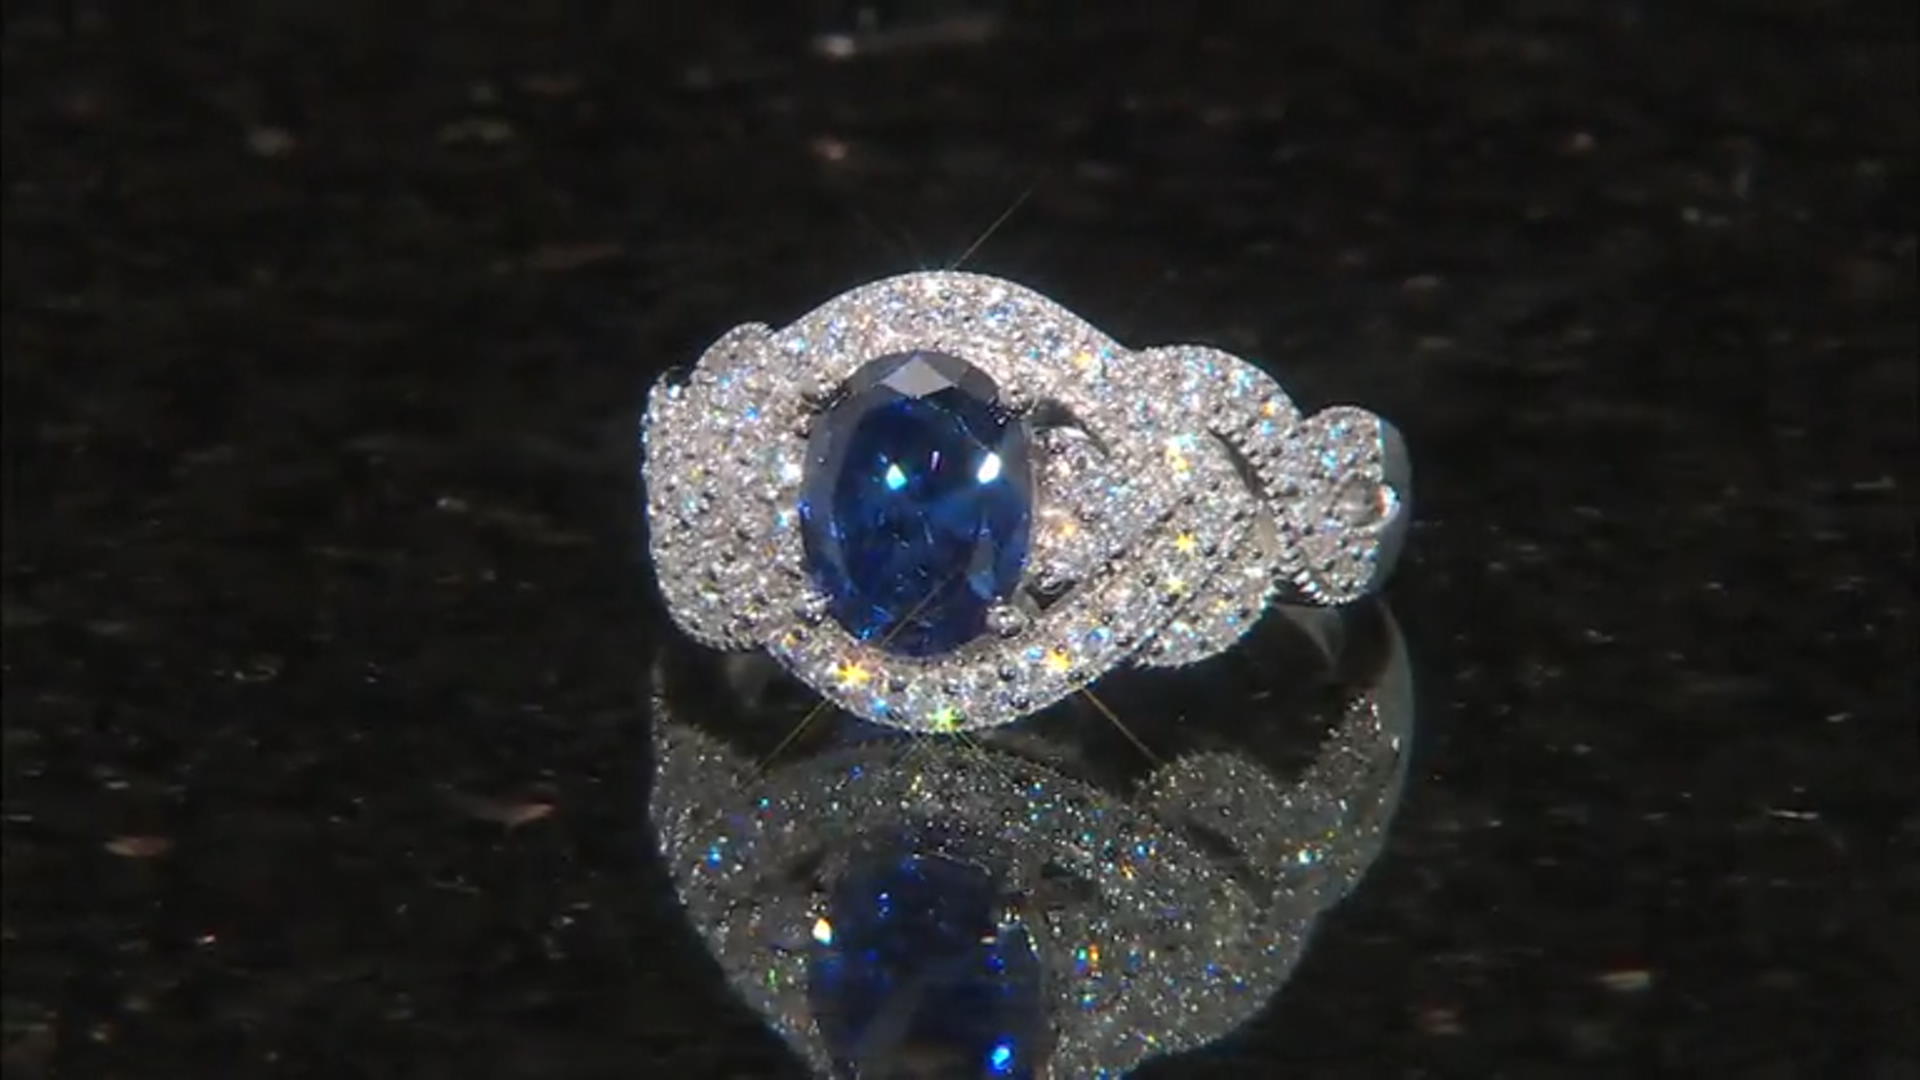 Blue And White Cubic Zirconia Rhodium Over Sterling Silver Ring 4.05ctw Video Thumbnail